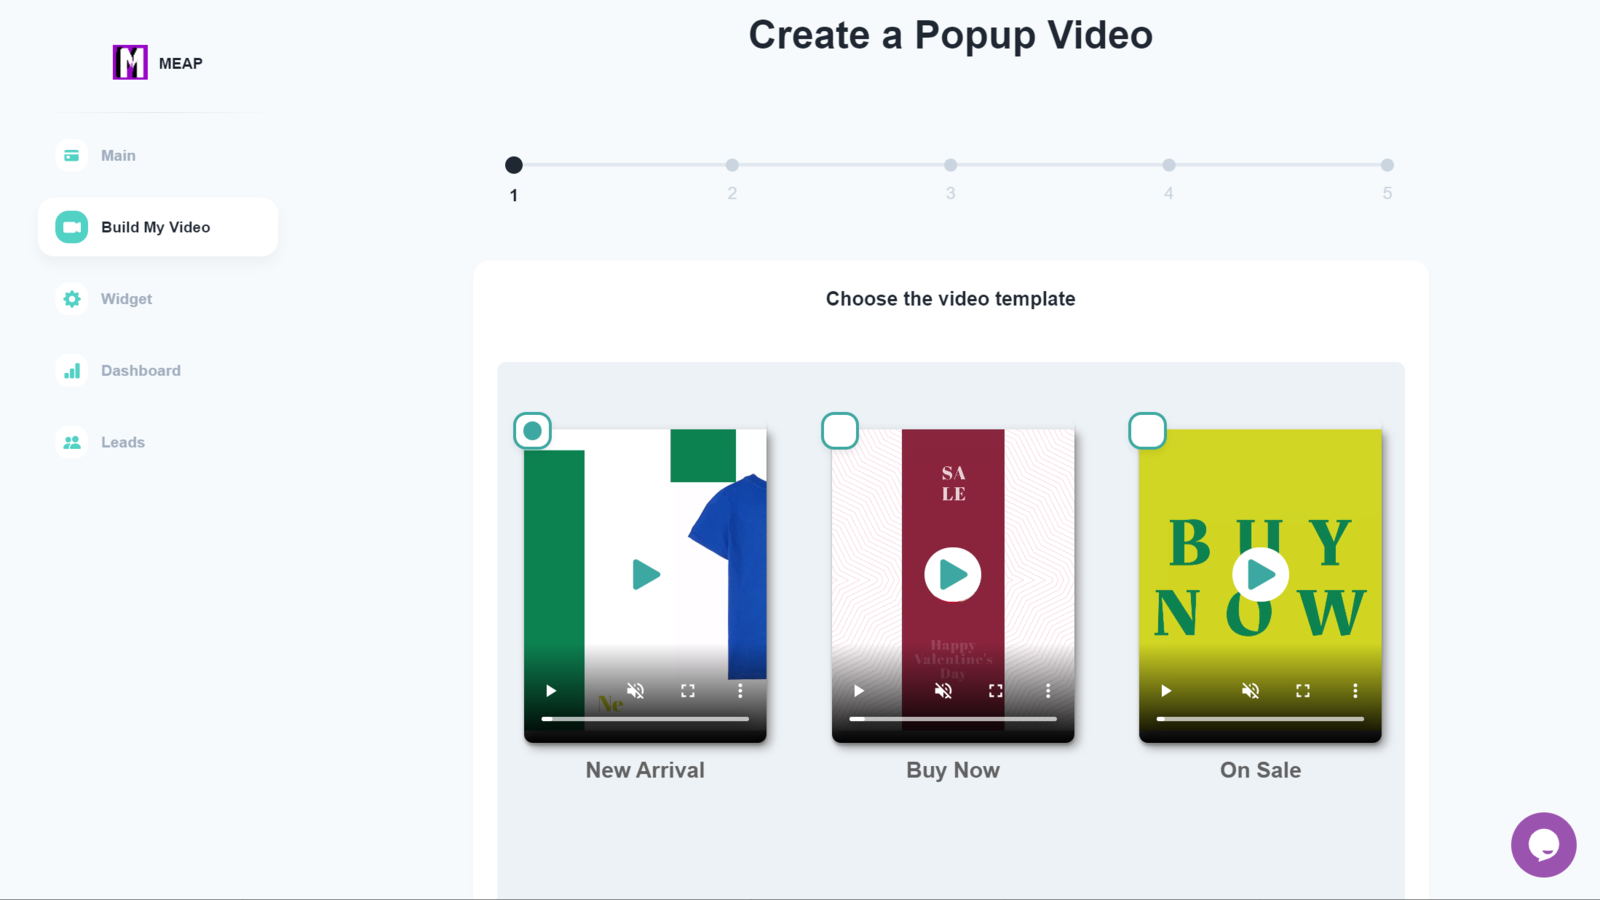 Create videos from various built-in templates